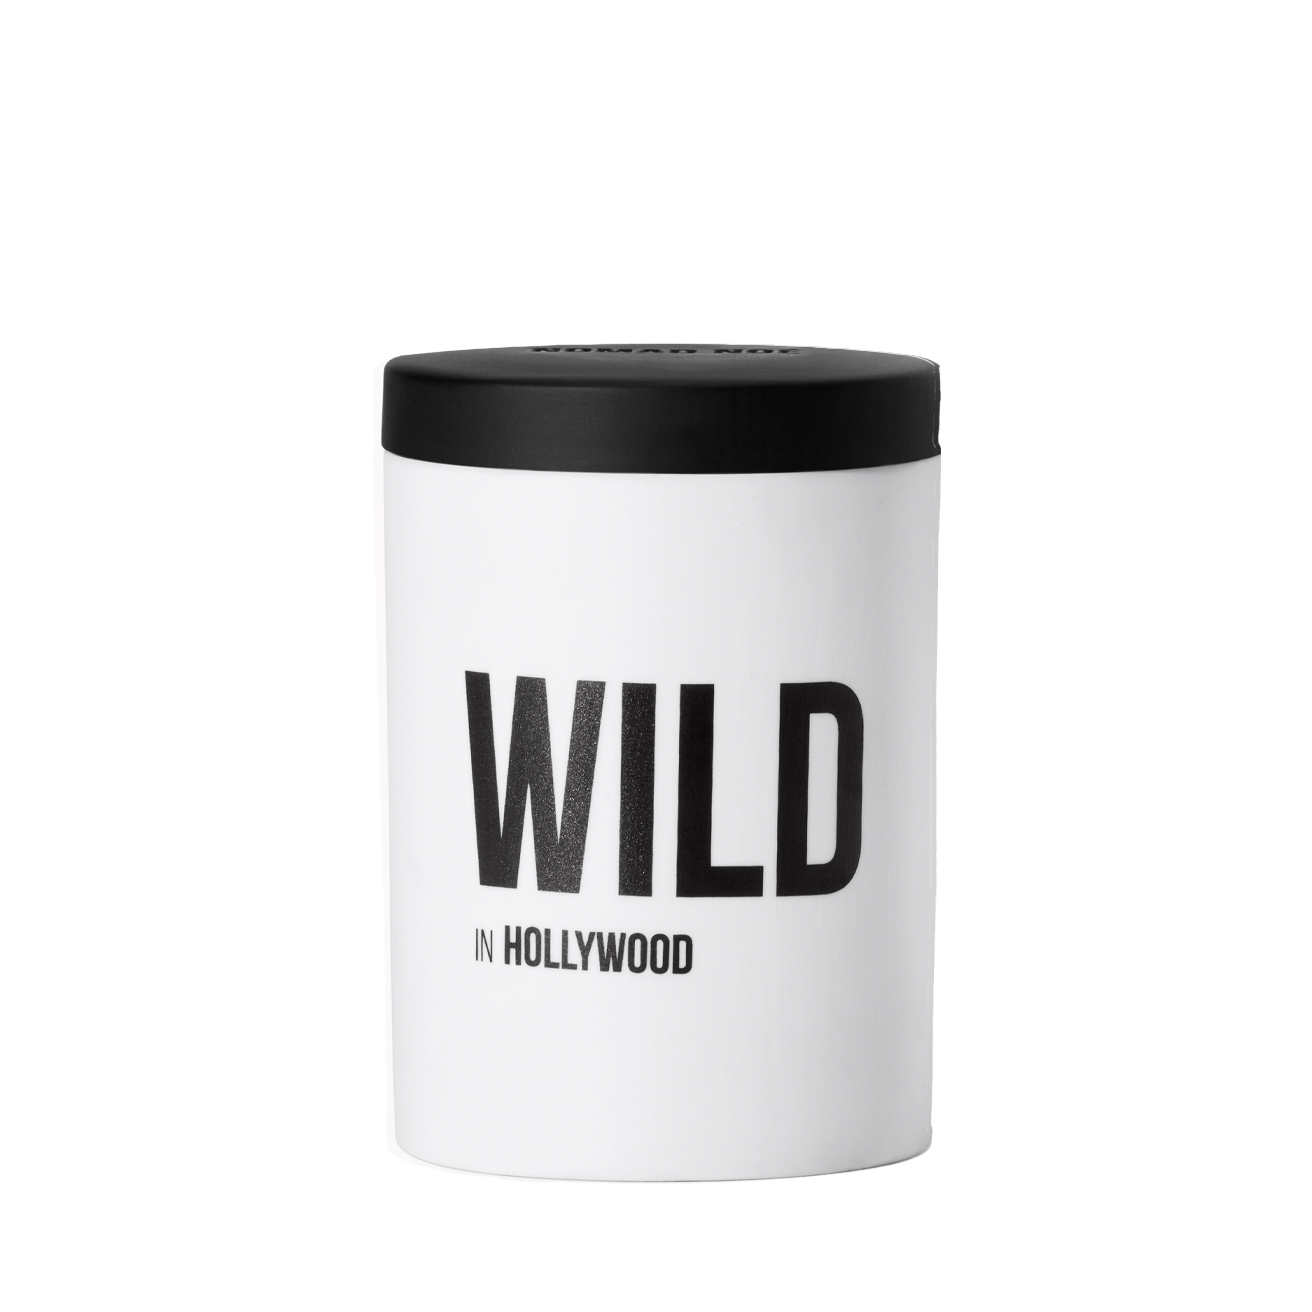 Nomad Noé Wild in Hollywood candle